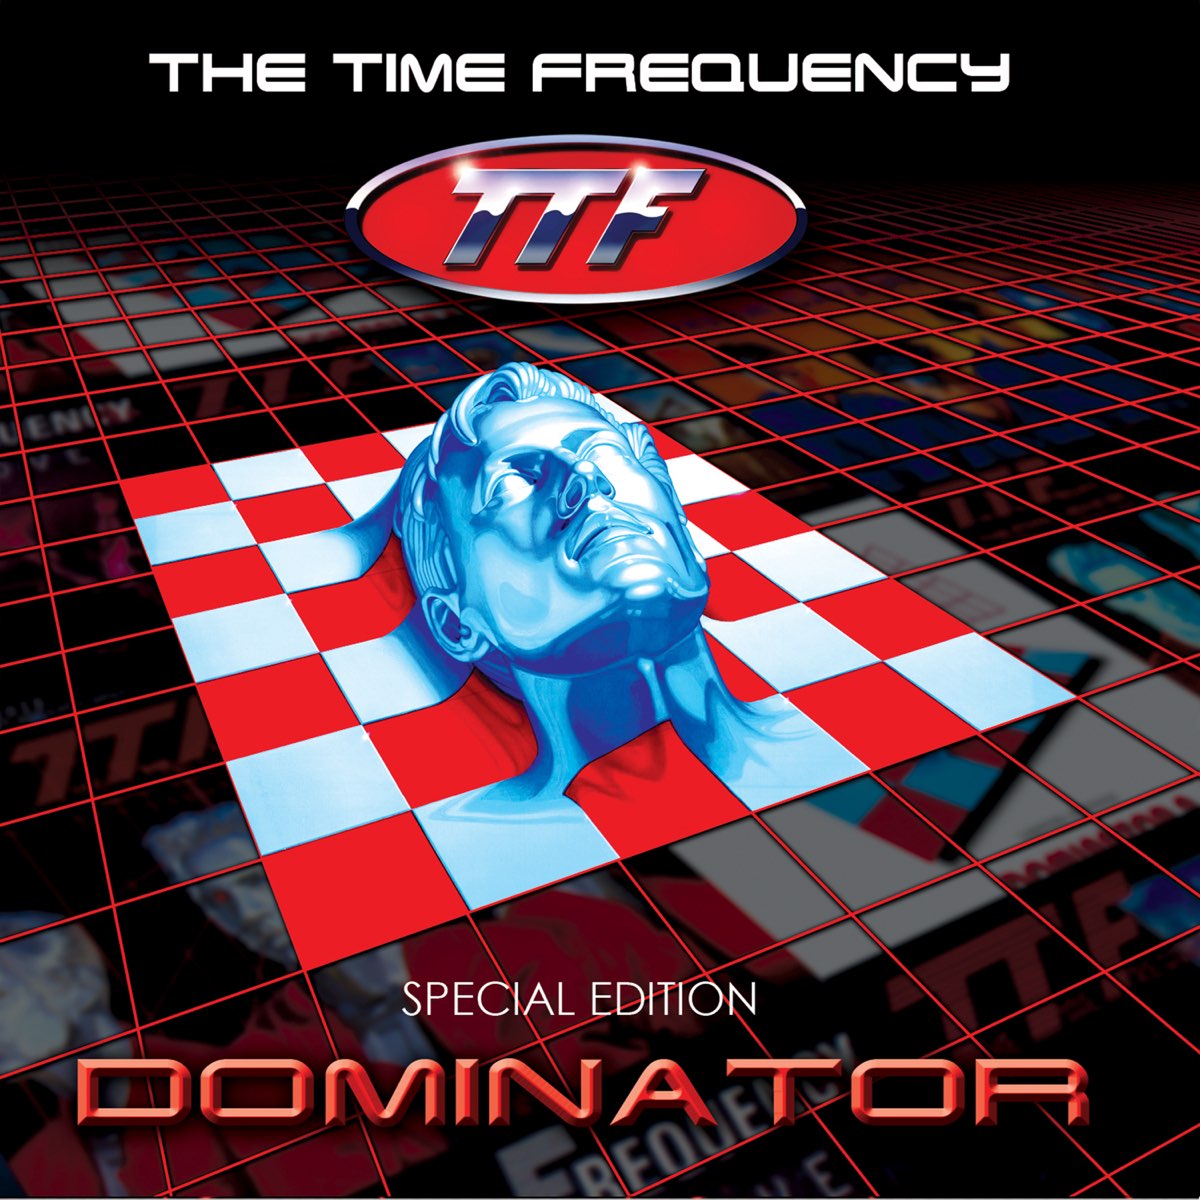 Time frequency. Frequency of time. The time Frequency Dominator 2.